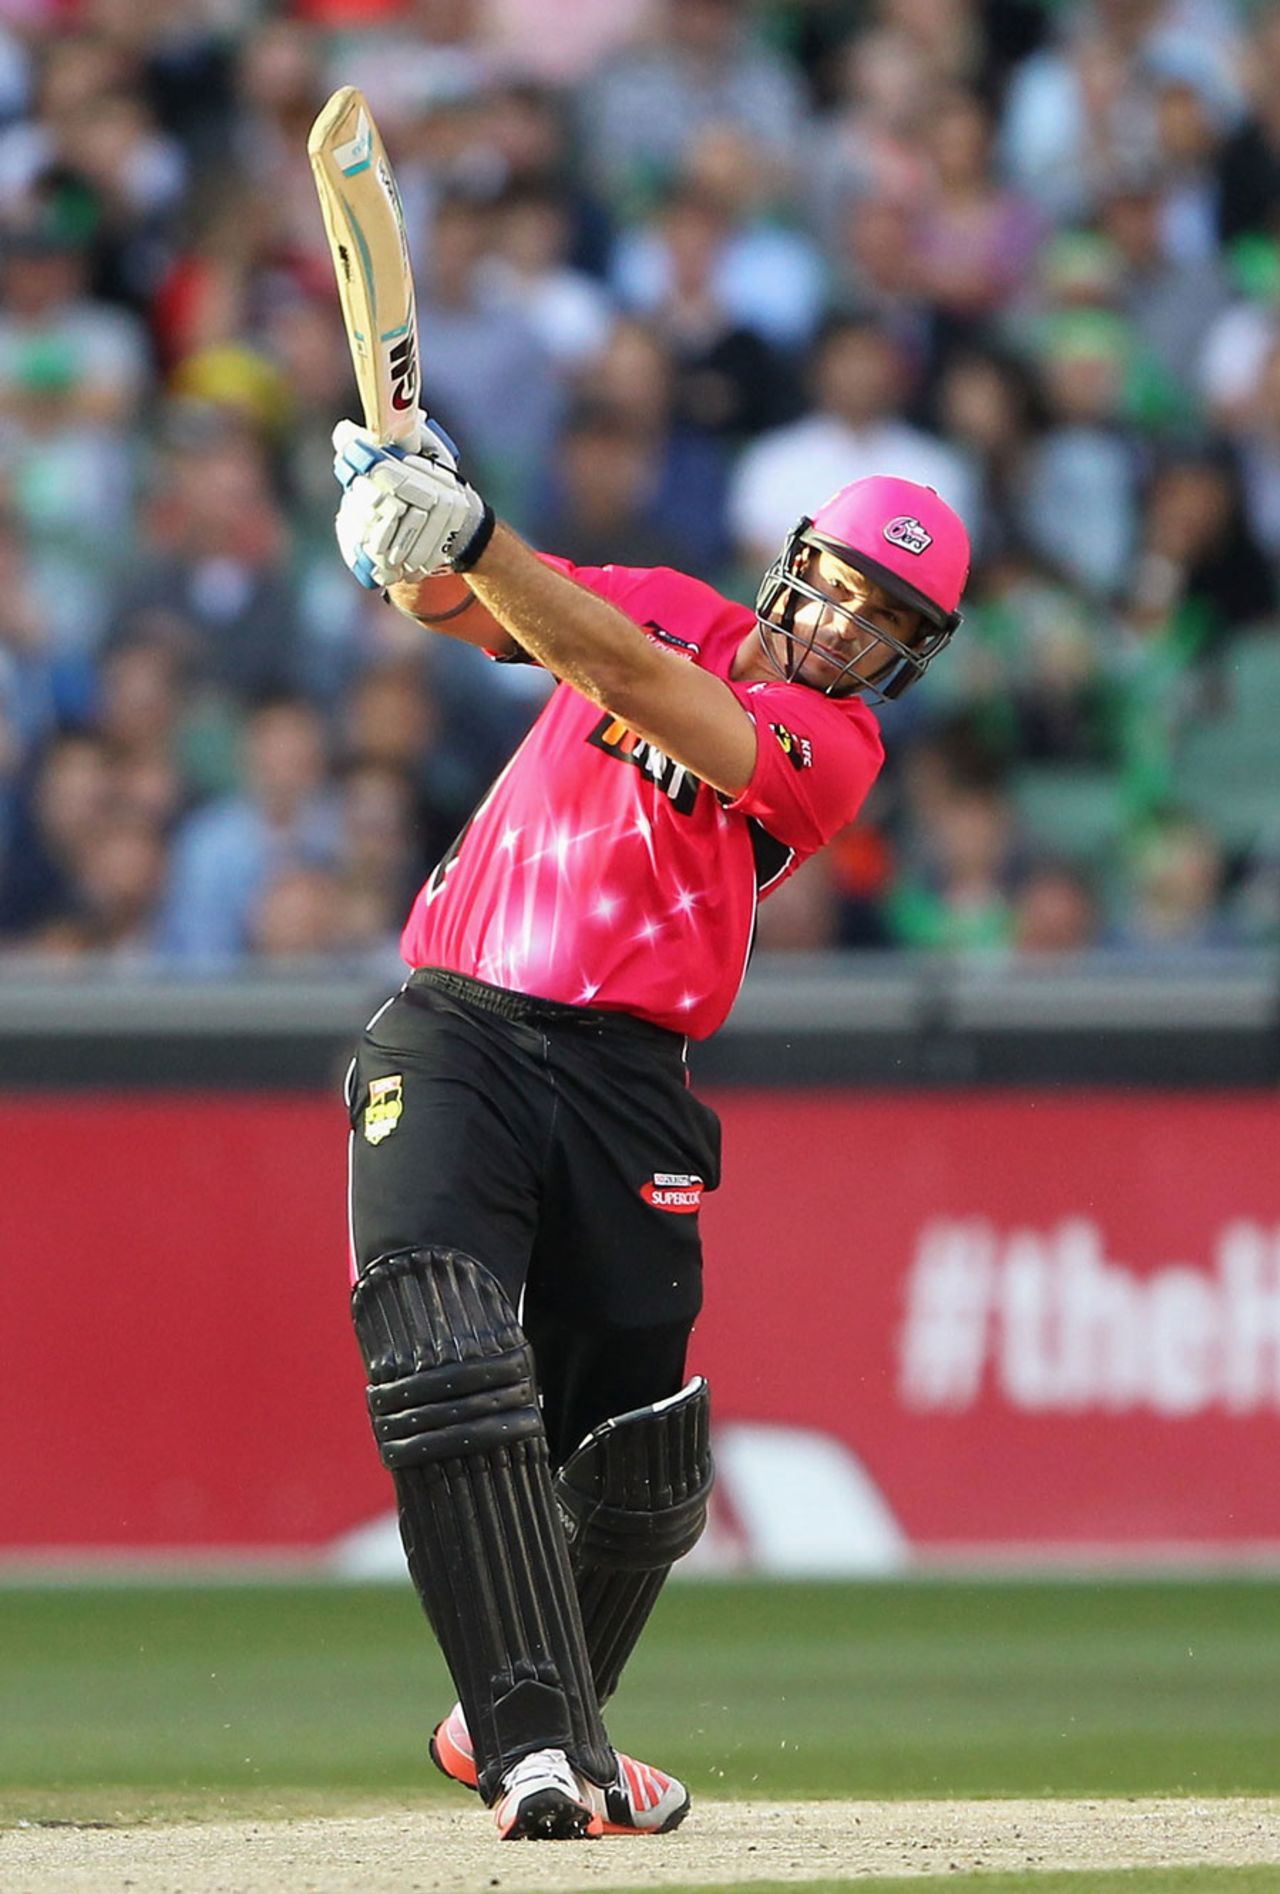 Michael Lumb led the way with 80 from 81 balls, Melbourne Stars v Sydney Sixers, Big Bash League 2014-15, Melbourne, January 5, 2015